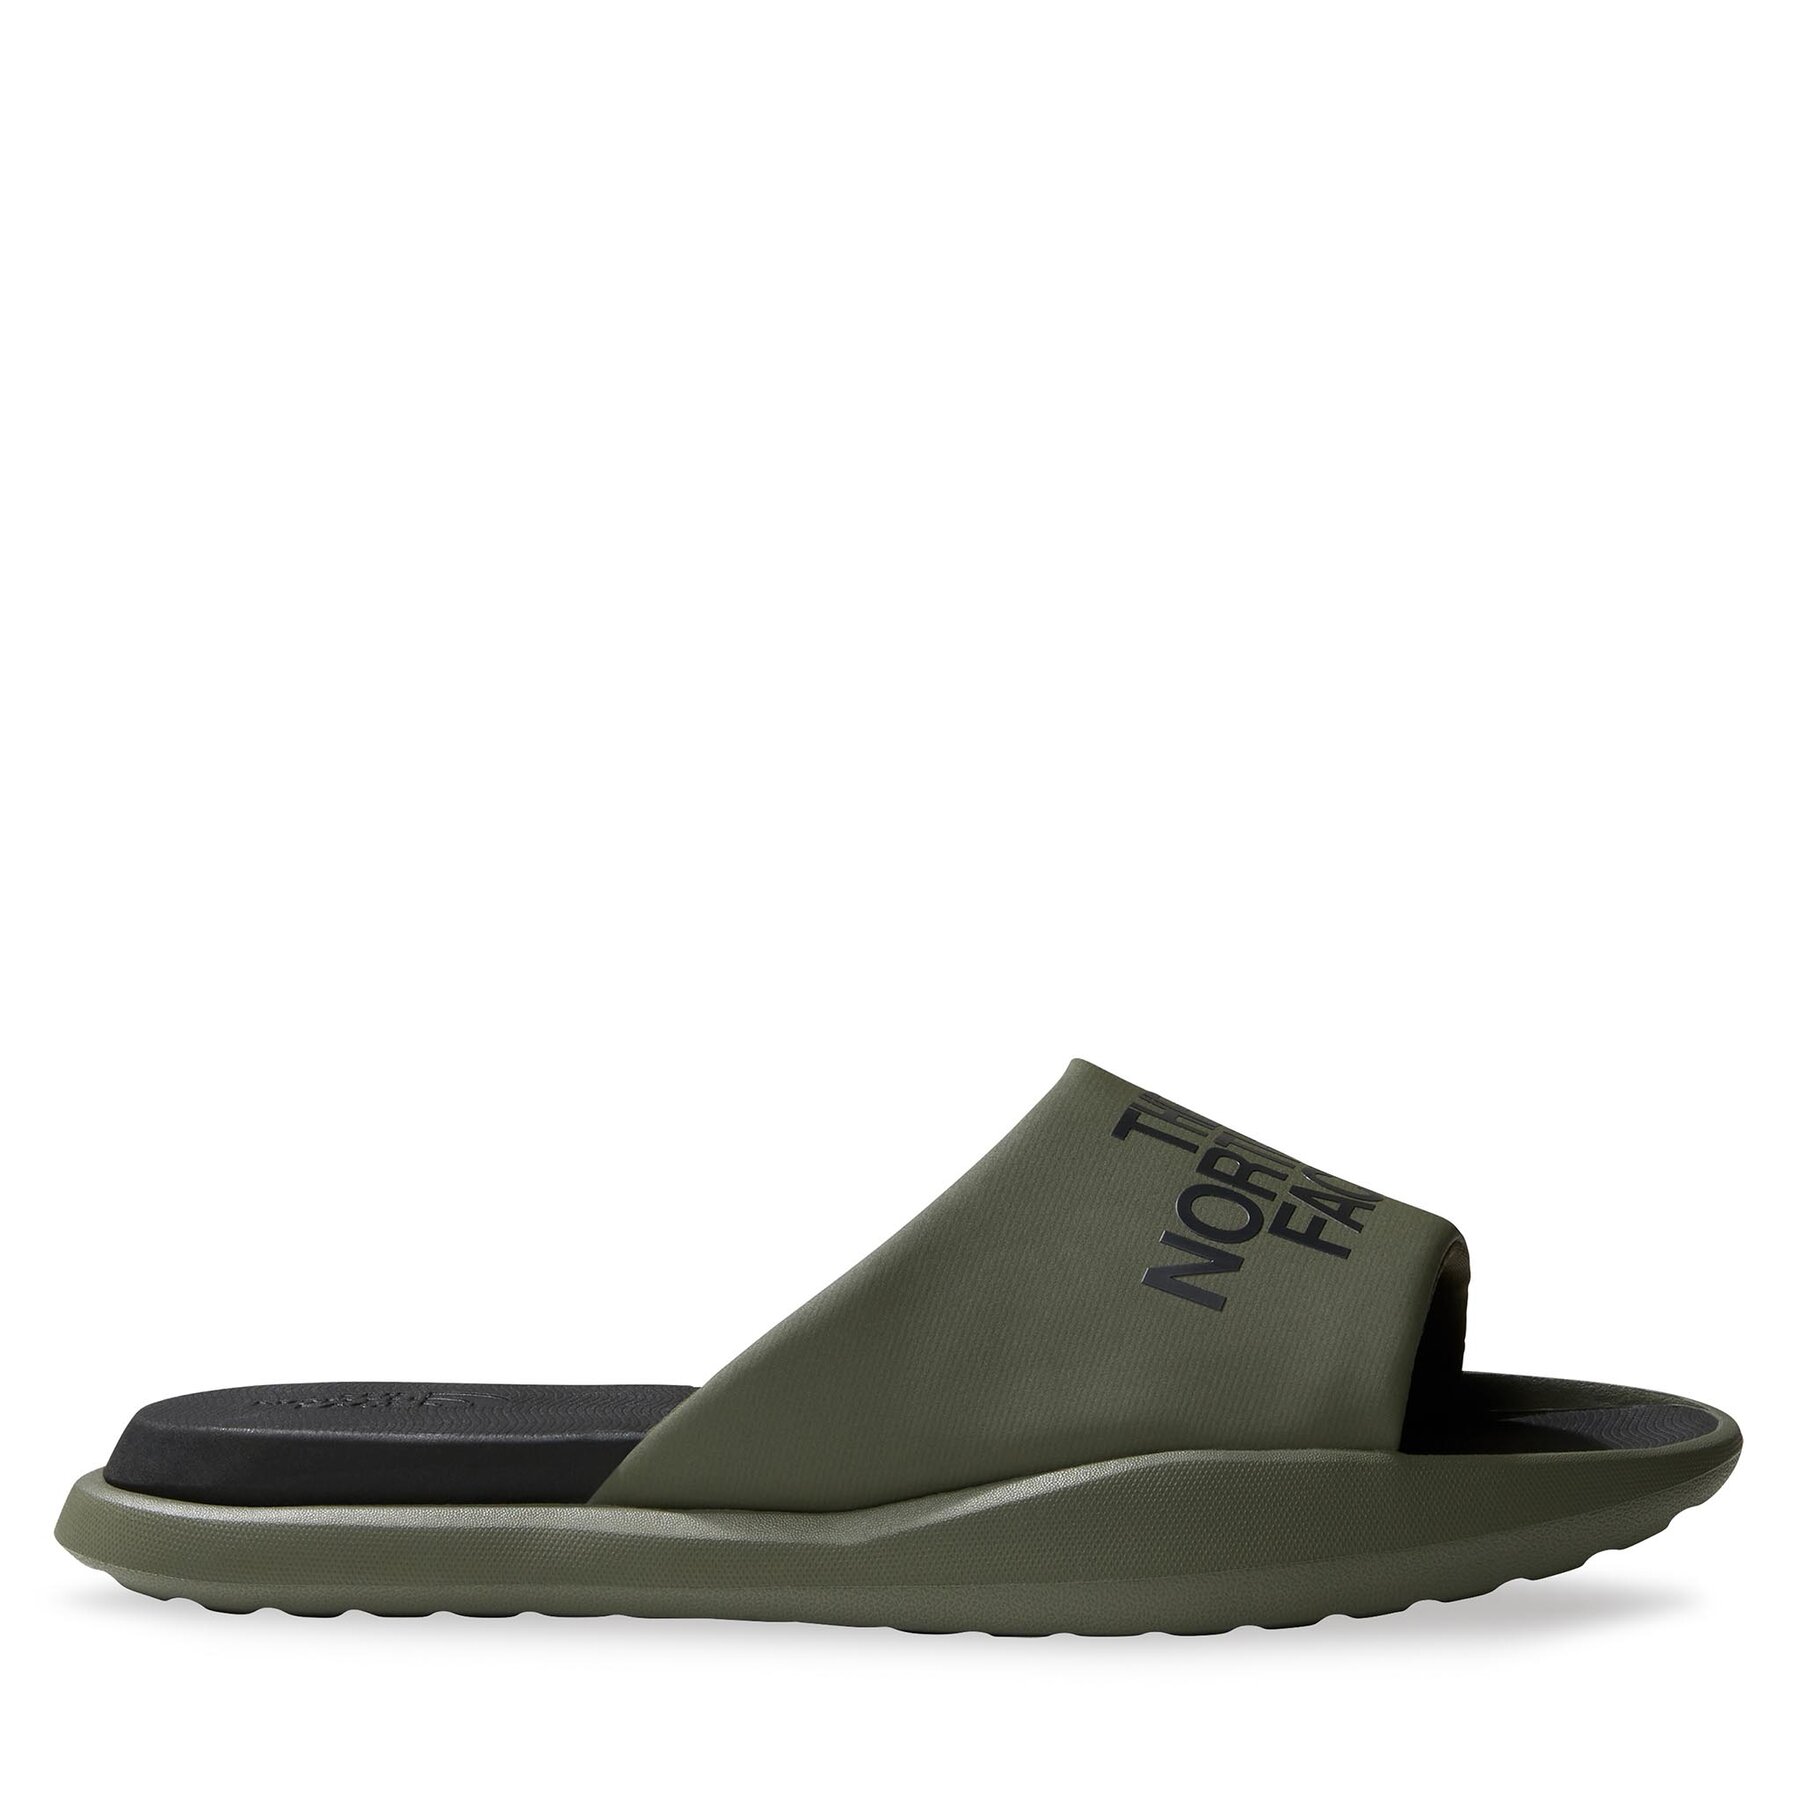 Pantoletten The North Face M Triarch Slide NF0A5JCABQW1 New Taupe Green/Tnf Black von The North Face